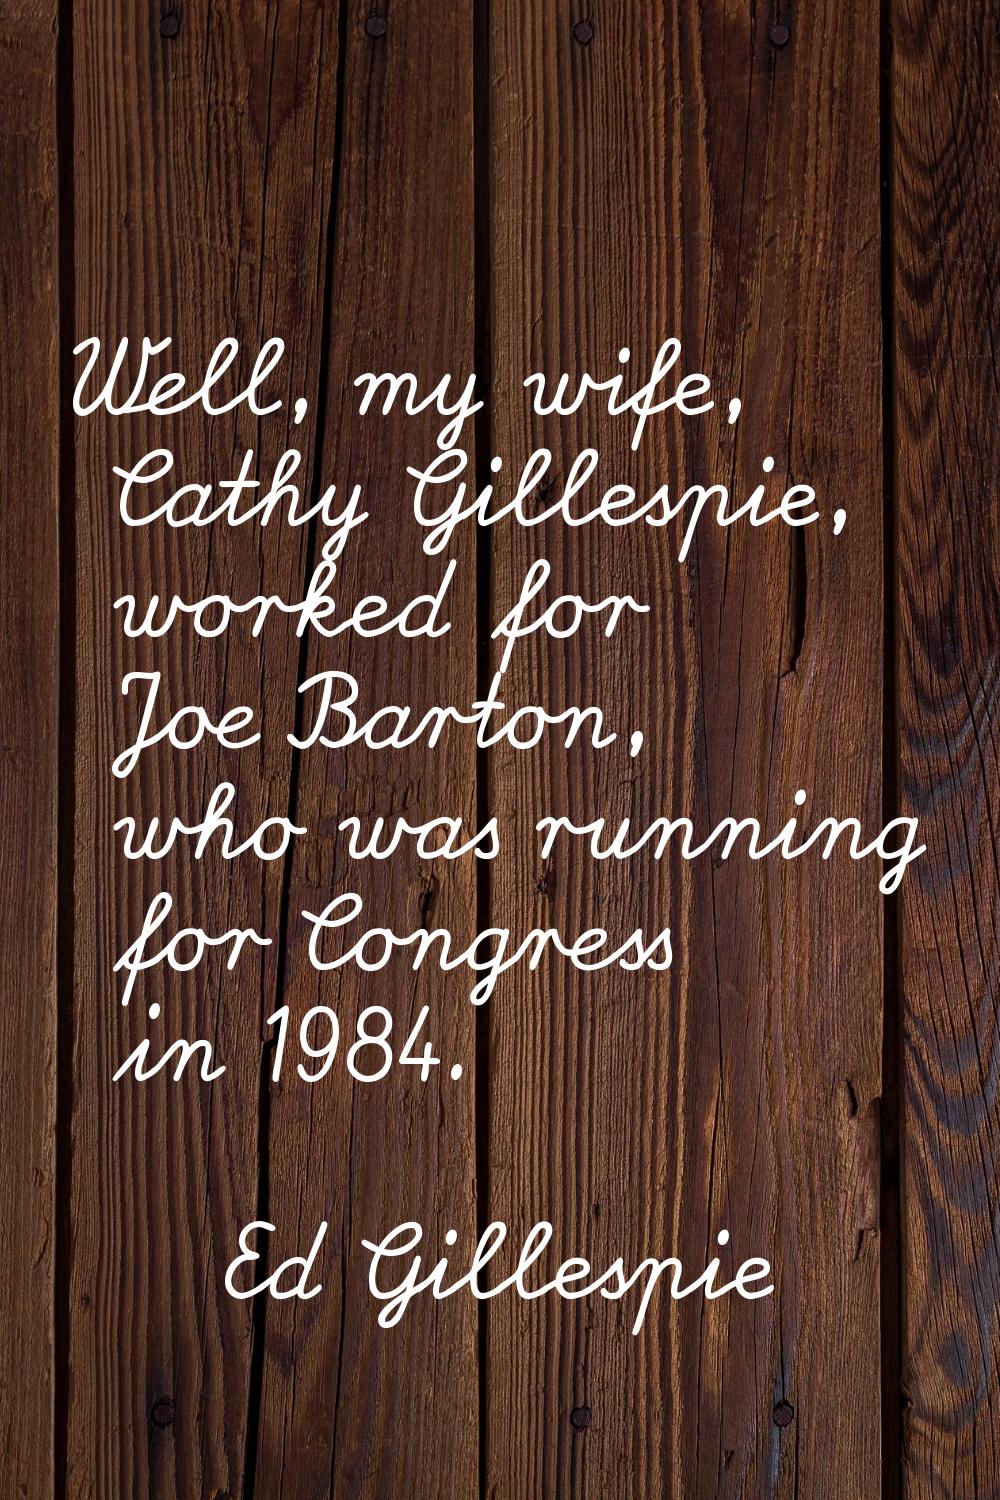 Well, my wife, Cathy Gillespie, worked for Joe Barton, who was running for Congress in 1984.